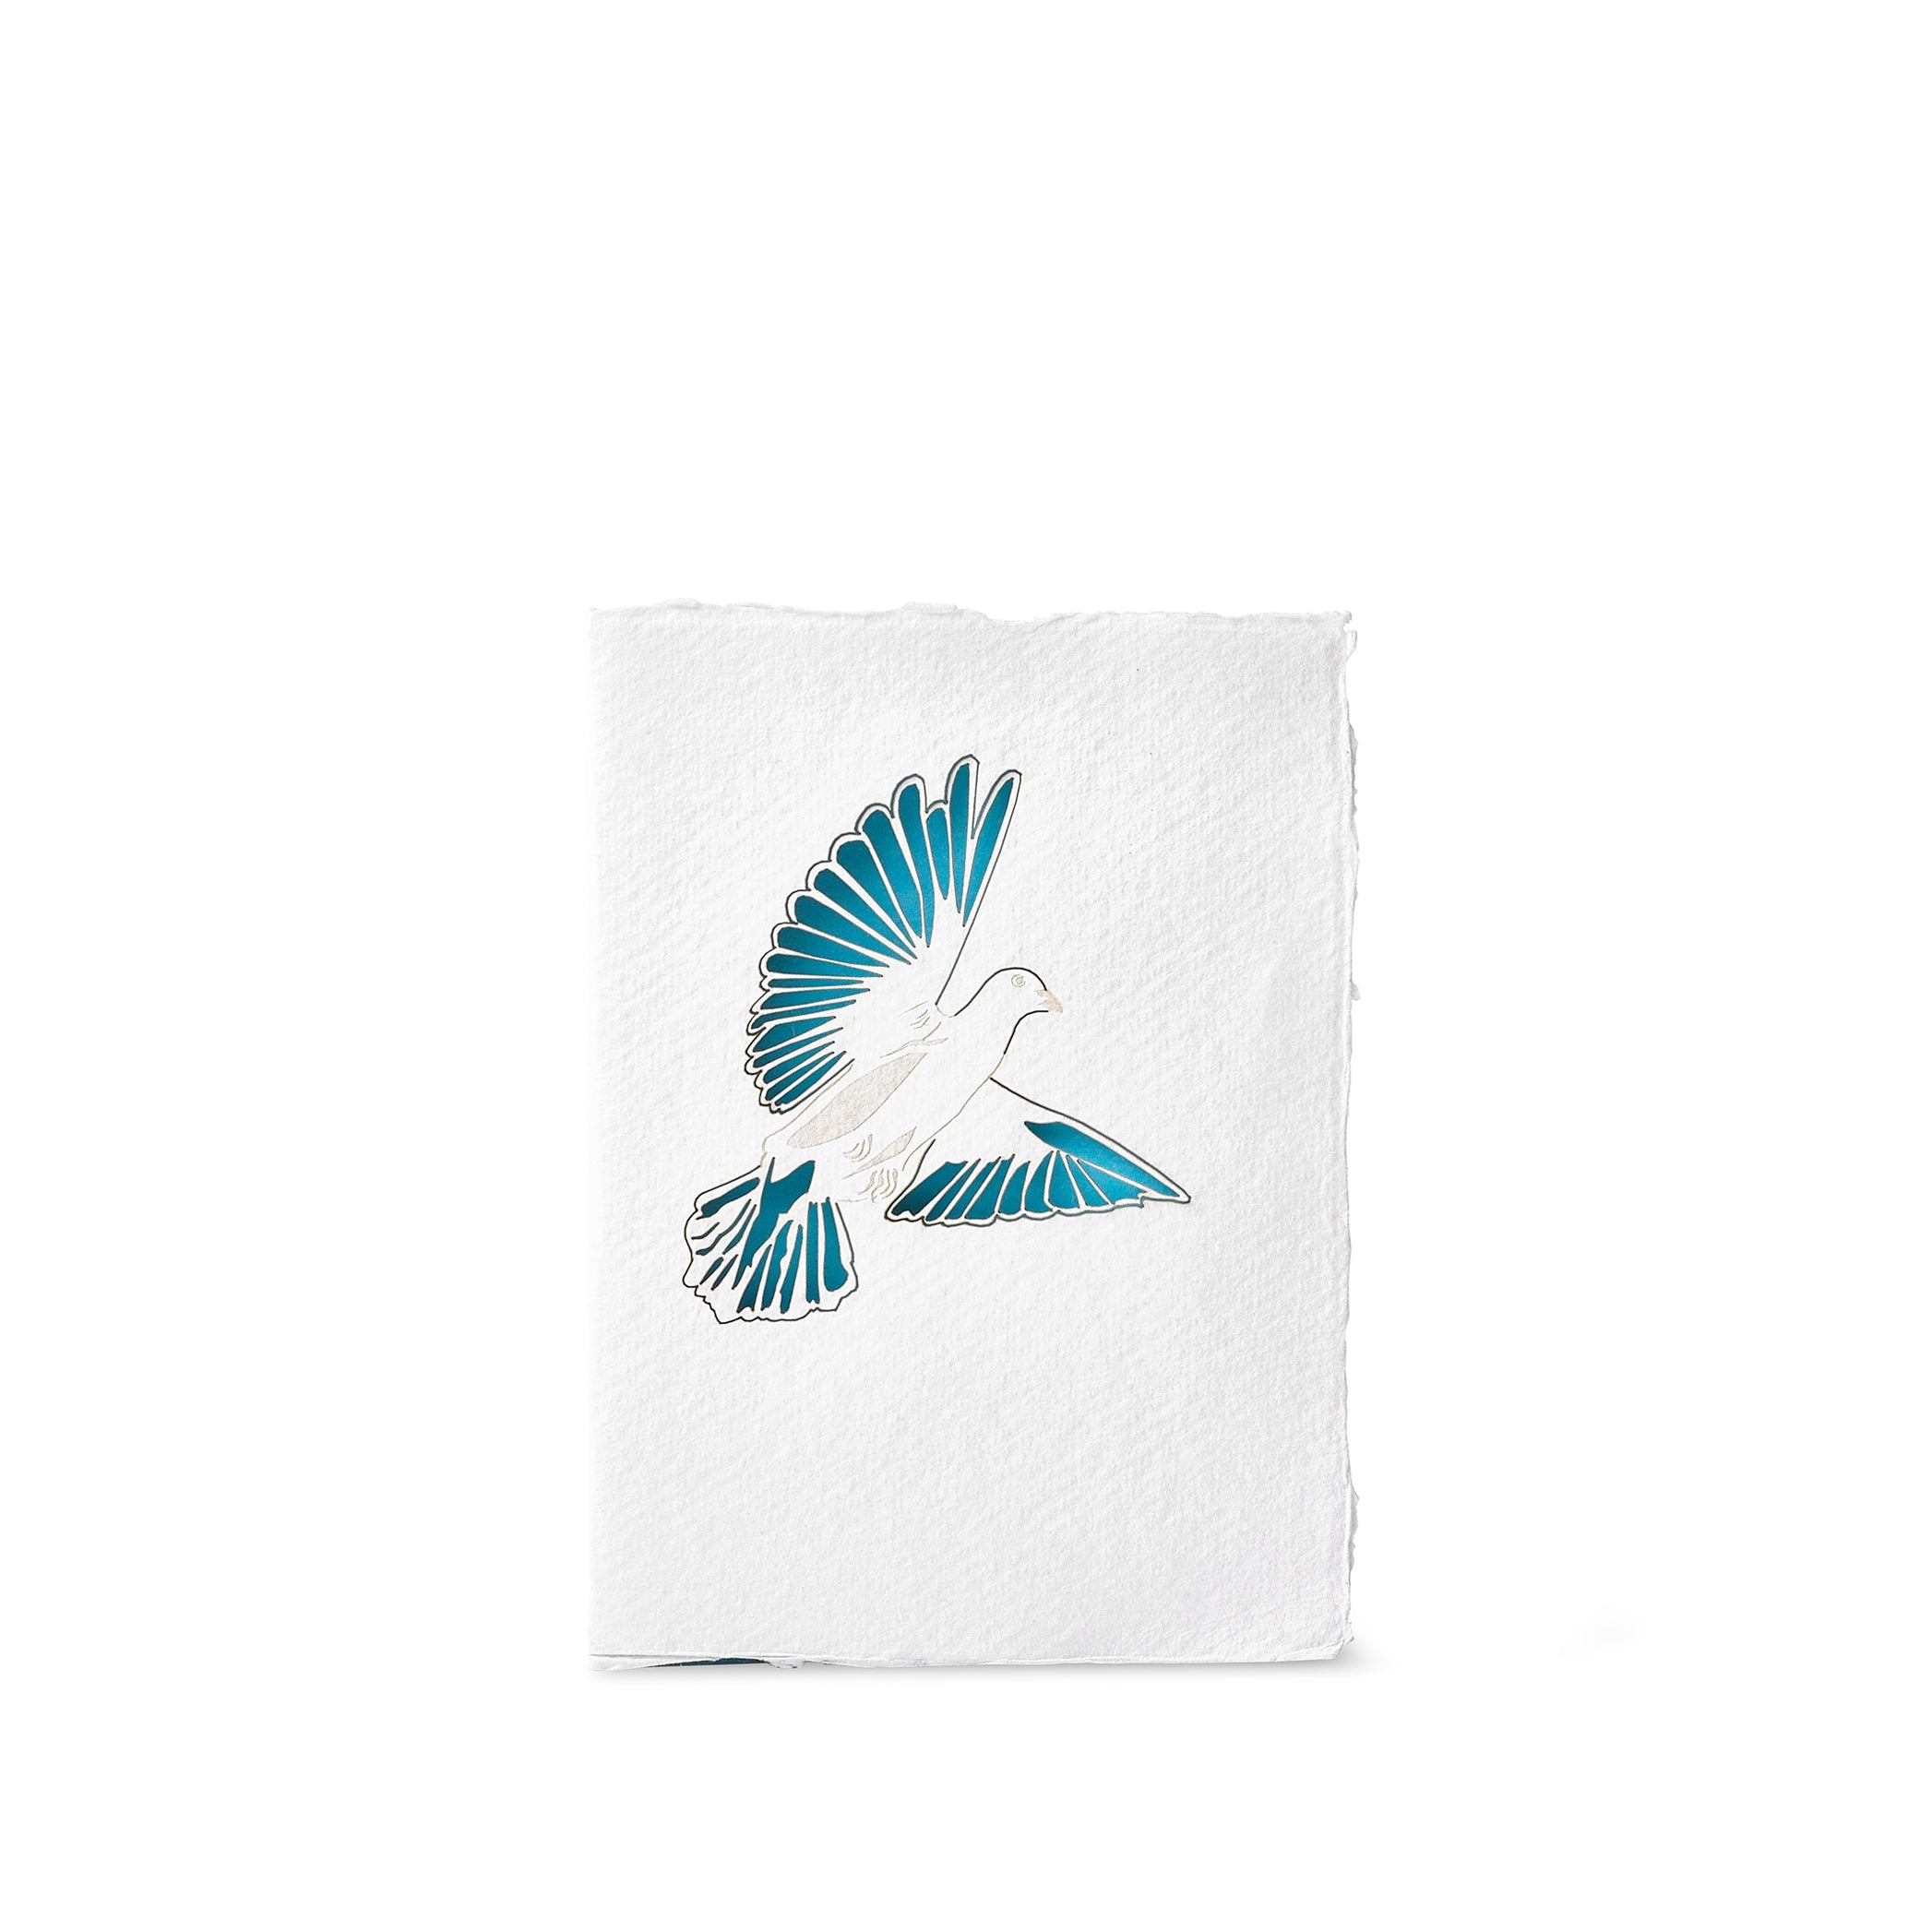 Handmade Paper Greeting Card with Dove, 15cm x 10cm